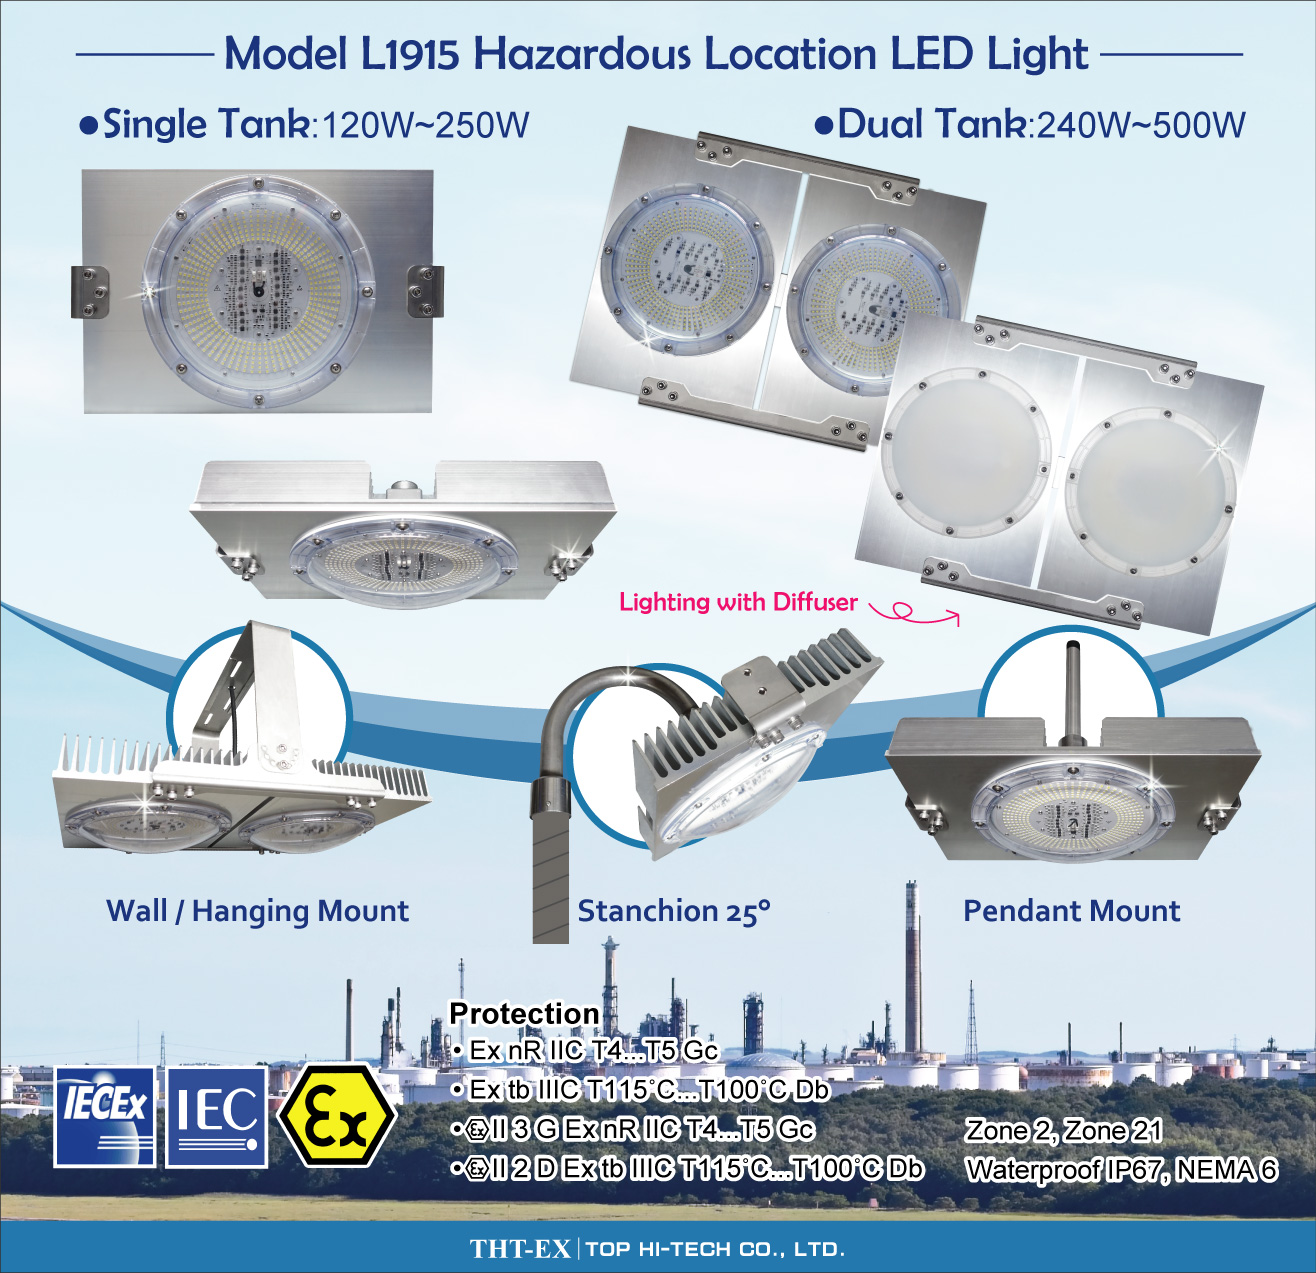 Breakthrough in Wattage_500W Economical Explosion-proof LED Lighting_THT-EX